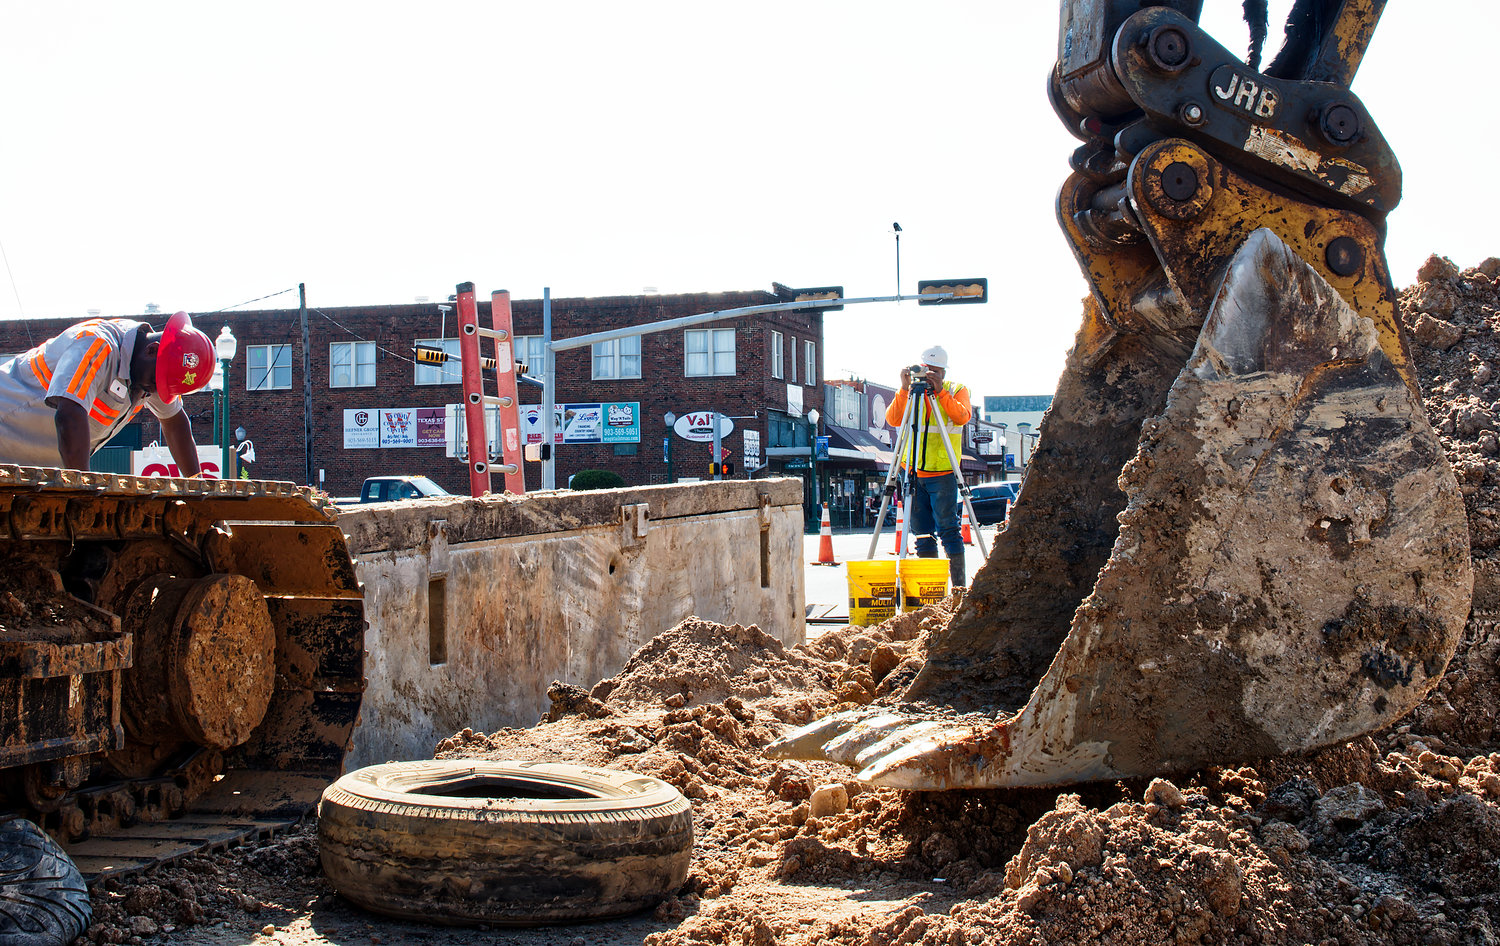 Traffic along East Broad St. in Mineola was disrupted for several days early last week as a collapsed sewer line required emergency repairs. (Monitor photo by Sam Major)